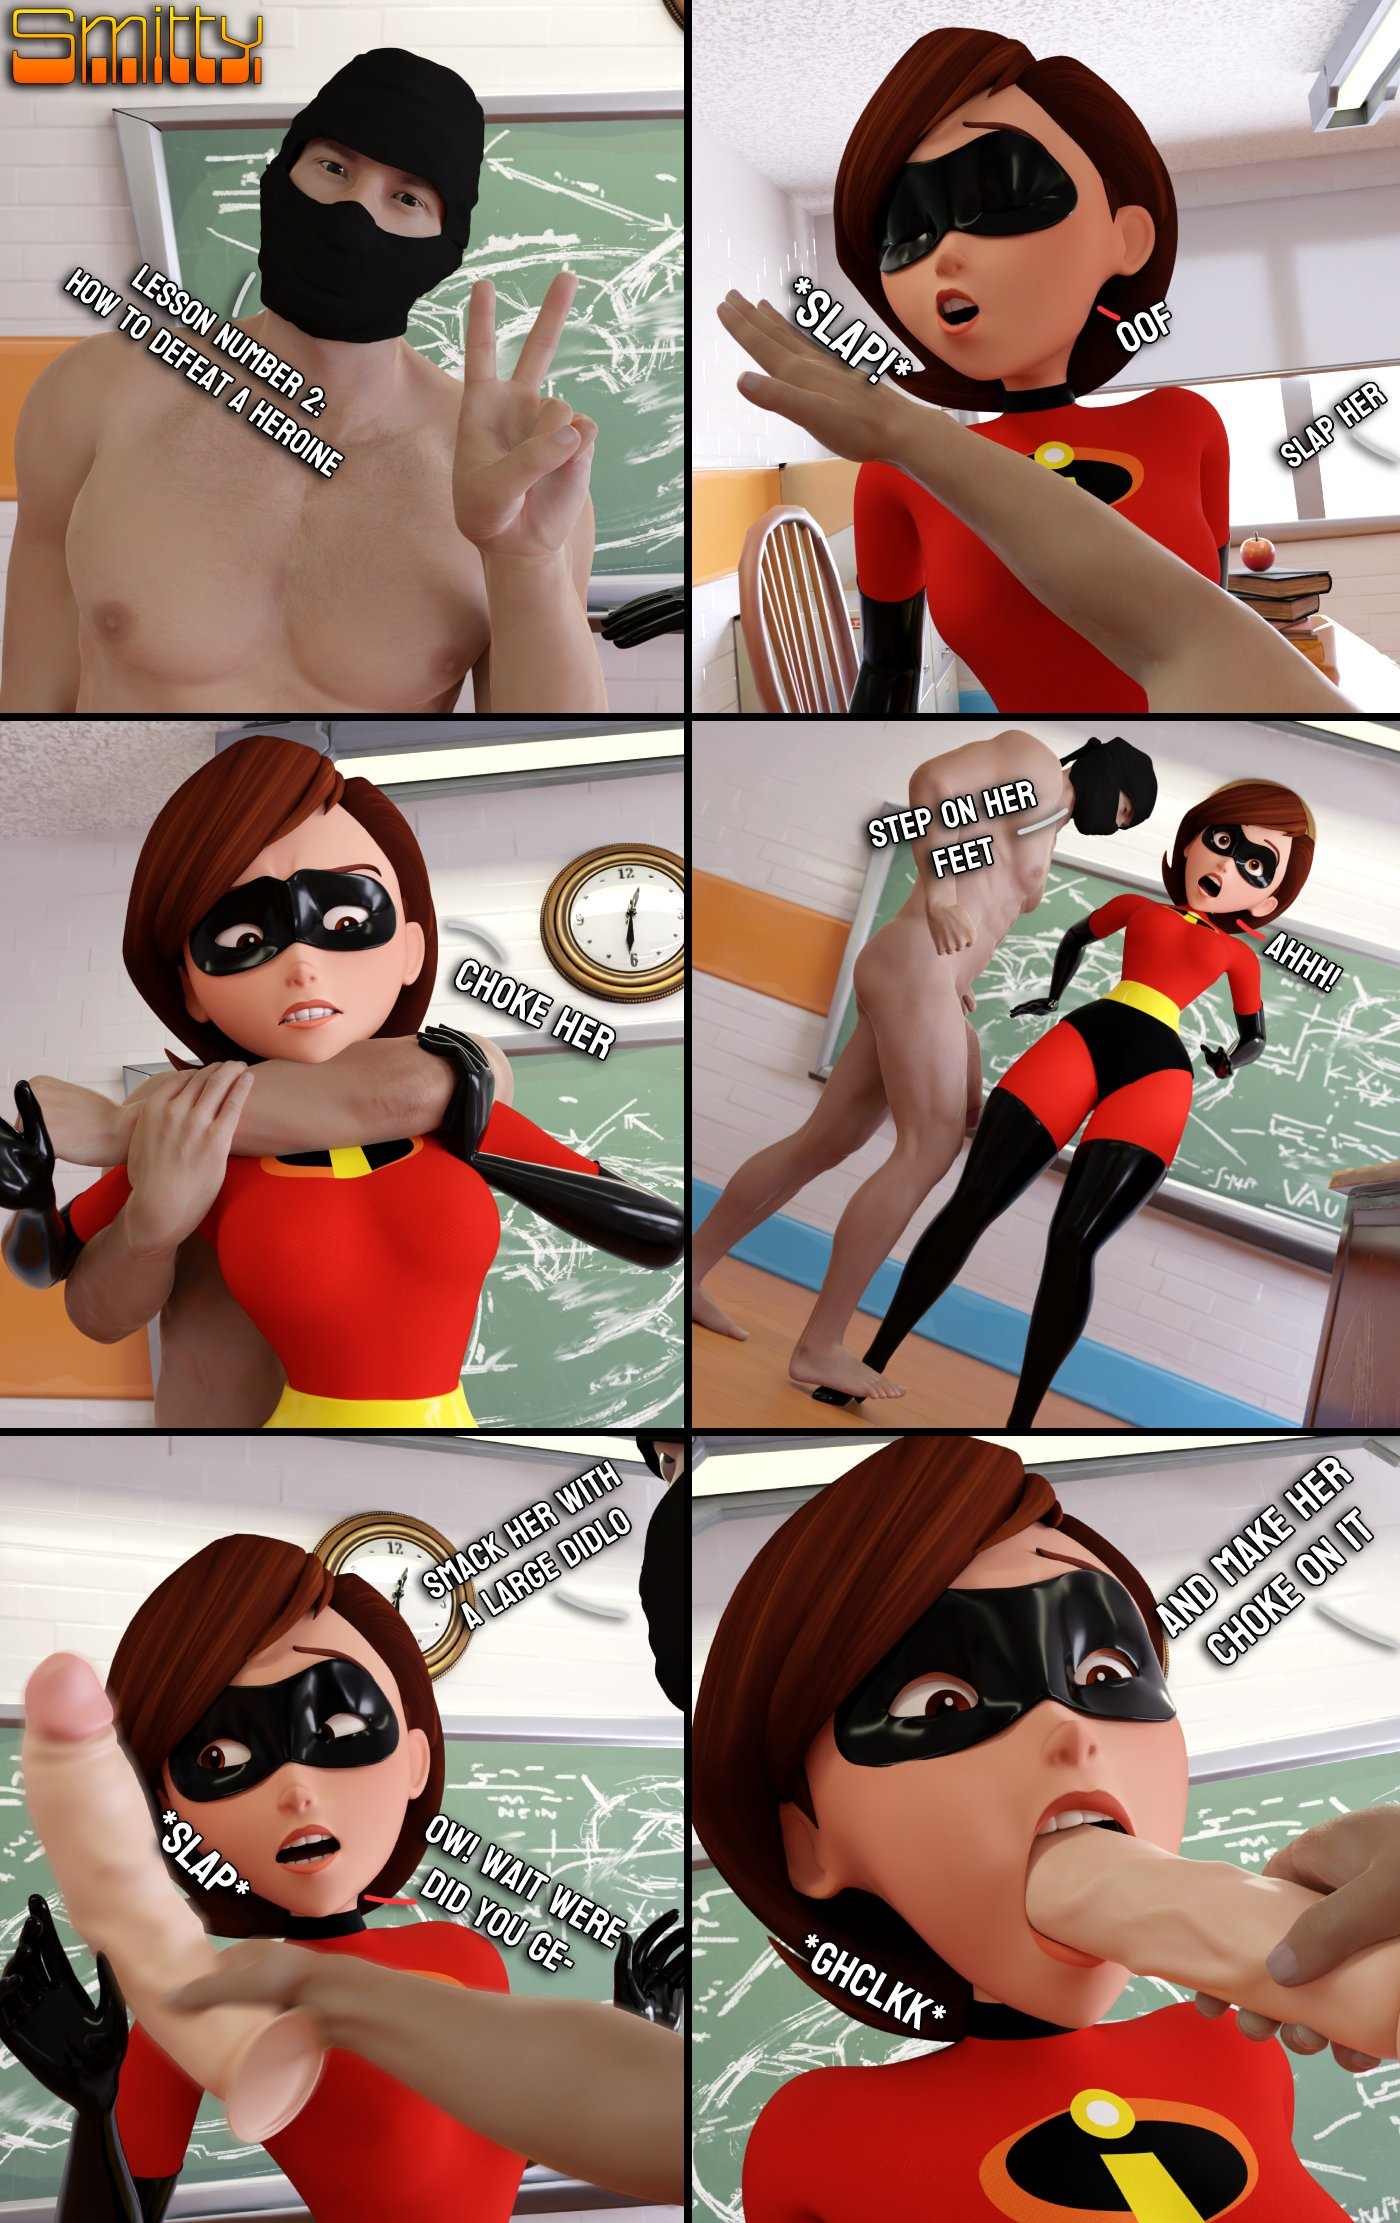 How to defeat a Heroine, with Elastigirl â€“ Smitty - Comics Army